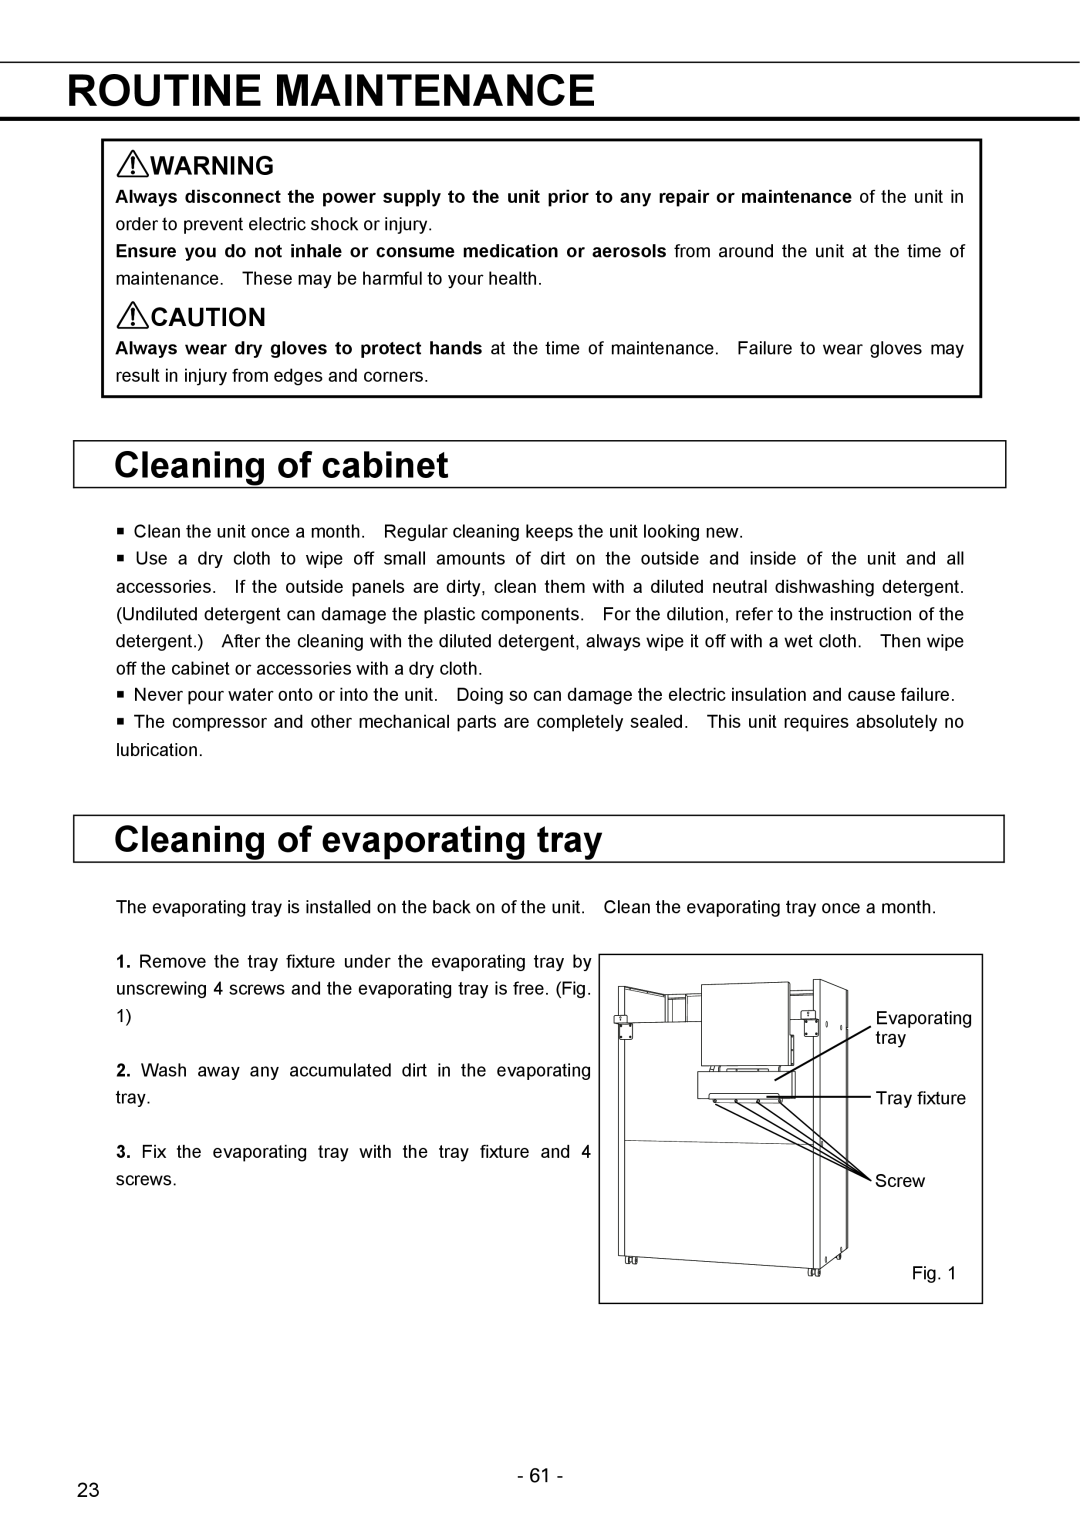 Sanyo MPR-1411R instruction manual Routine Maintenance, Cleaning of cabinet, Cleaning of evaporating tray 